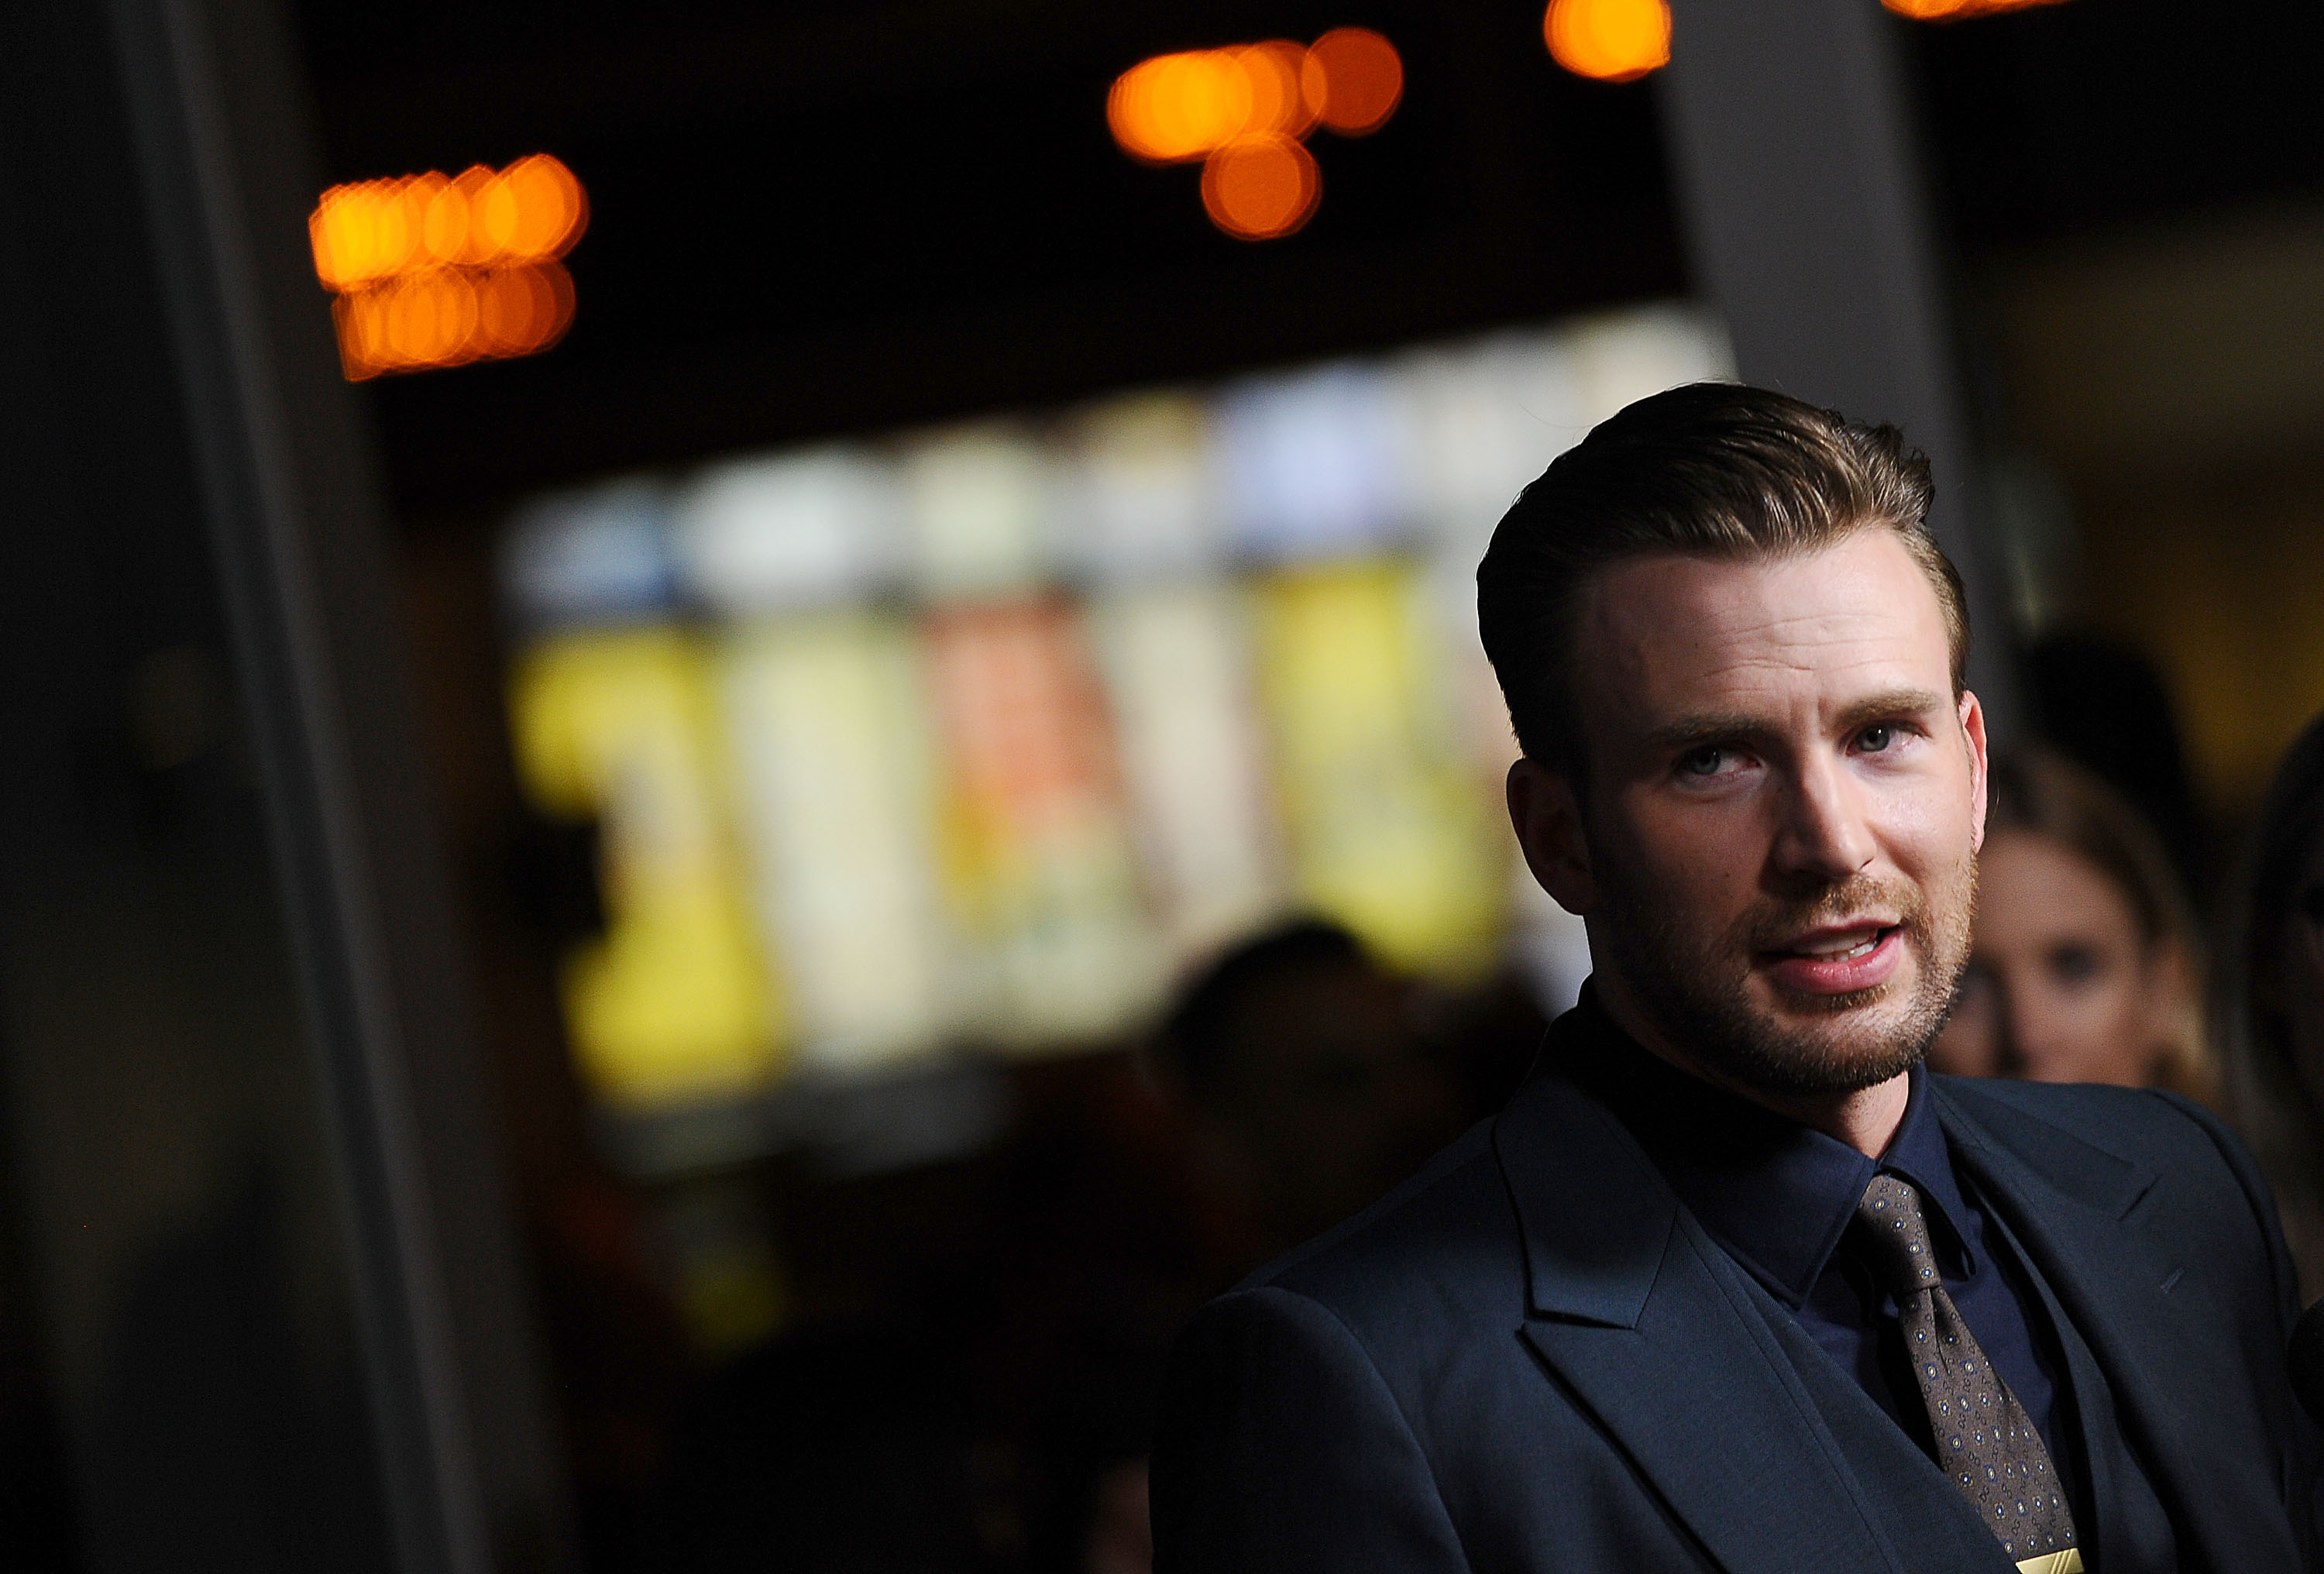 Chris Evans attends the premiere of "Before We Go" in Hollywood on Sept. 2, 2015. (Jason LaVeris—Getty Images)